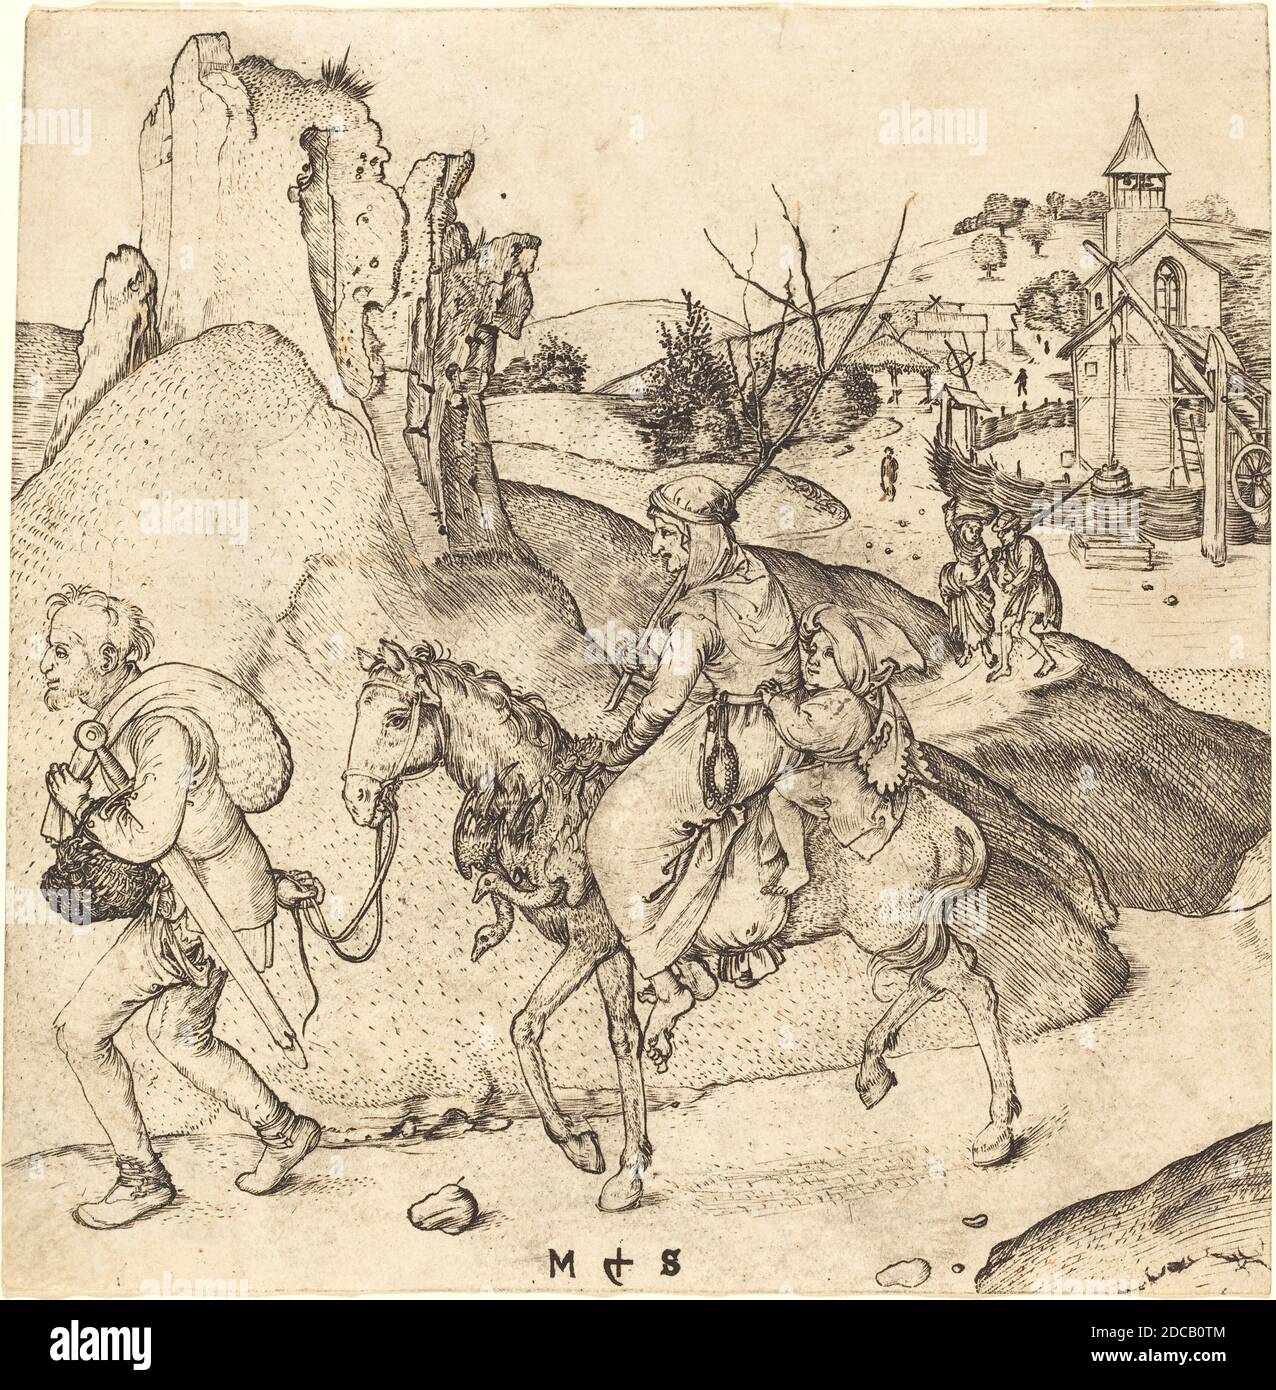 Martin Schongauer, (artist), German, c. 1450 - 1491, Peasant Family Going to Market, c. 1470/1475, engraving on laid paper, sheet (trimmed within plate mark): 16.2 x 16 cm (6 3/8 x 6 5/16 in Stock Photo